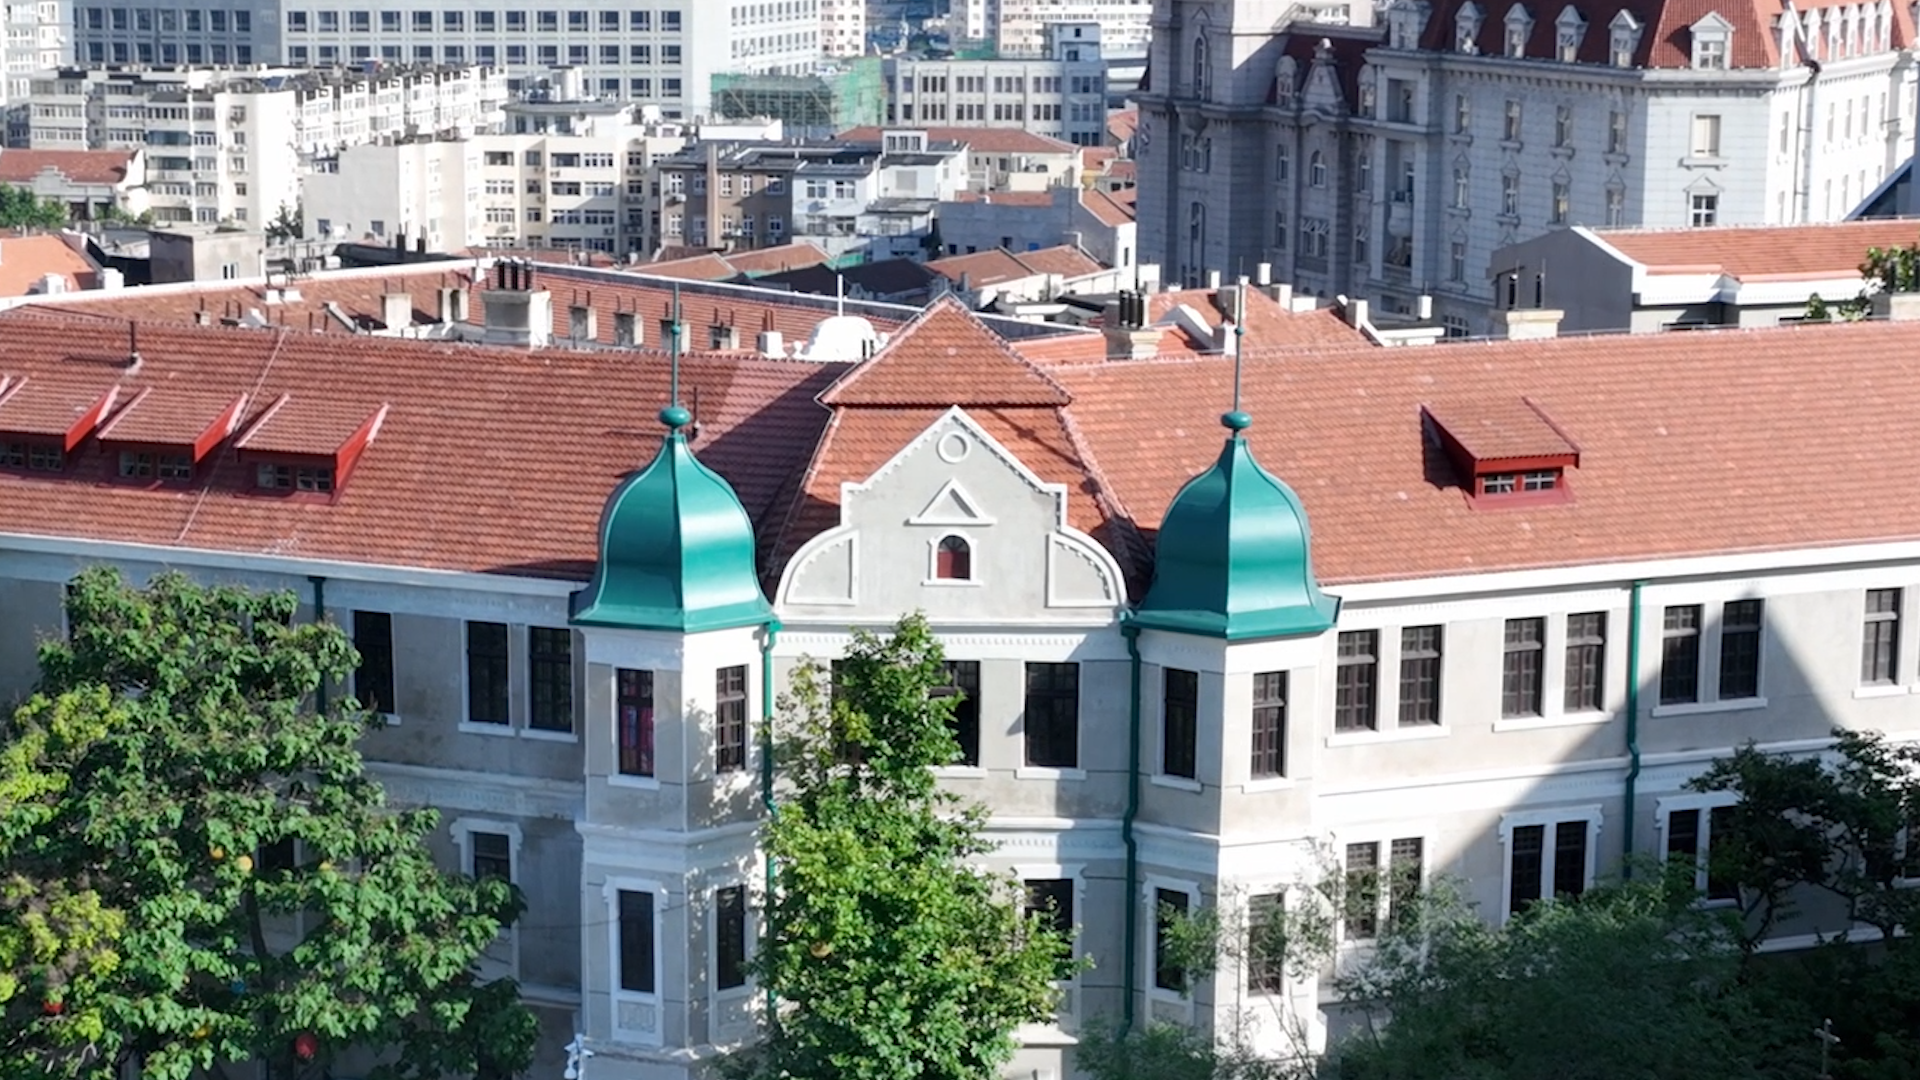 The Convent of the Sacred Heart has been restored